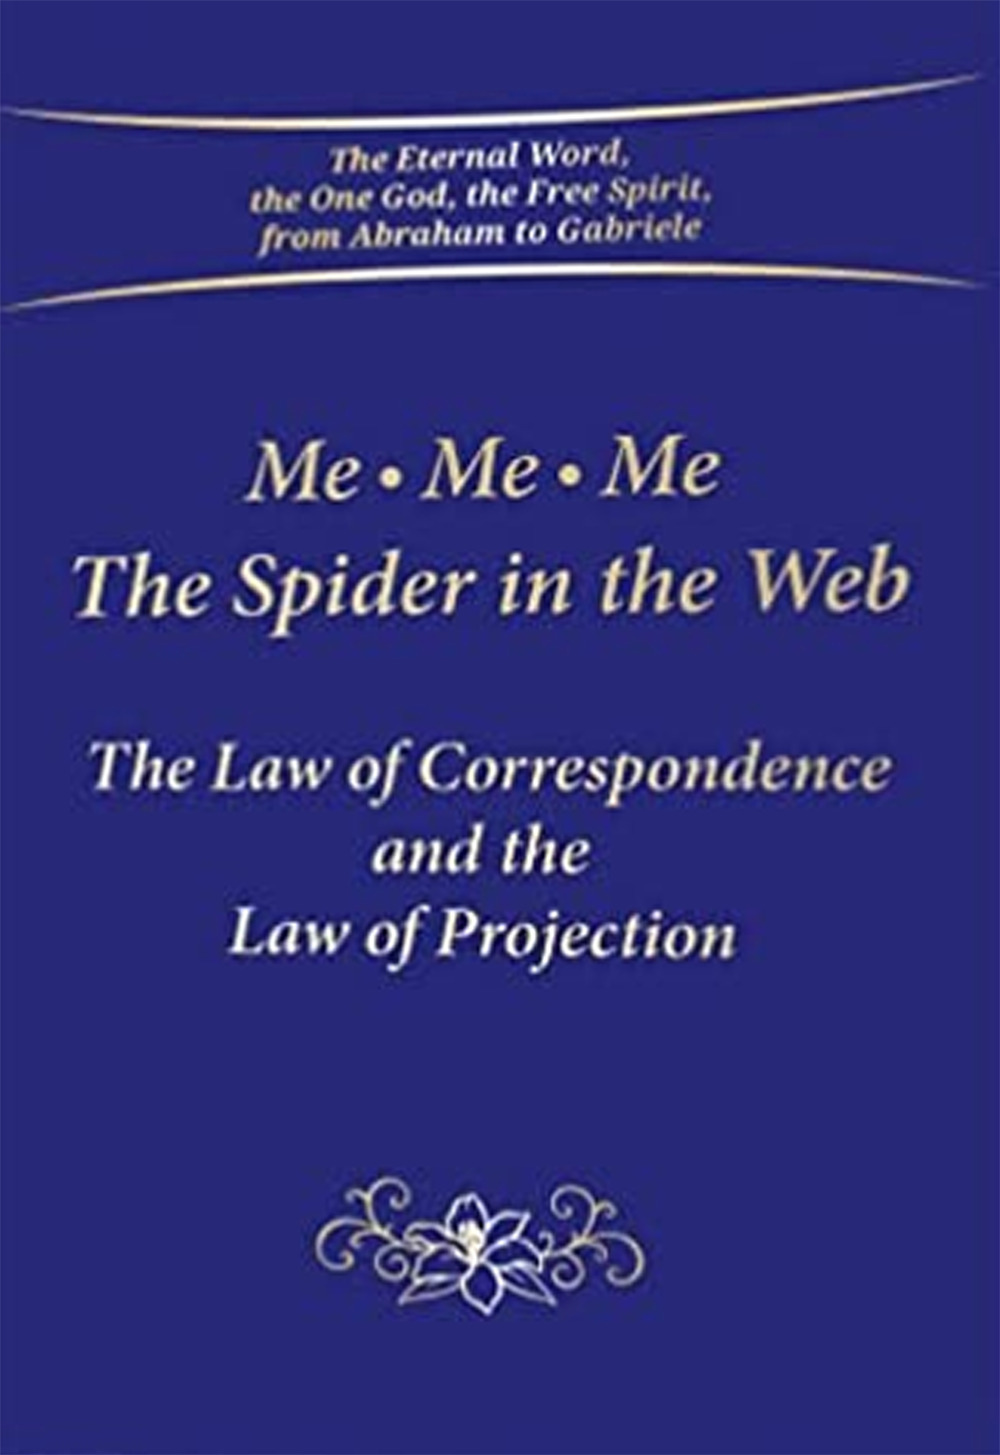 Me Me Me. The spider in the Web. The law of correspondence and the law of projection